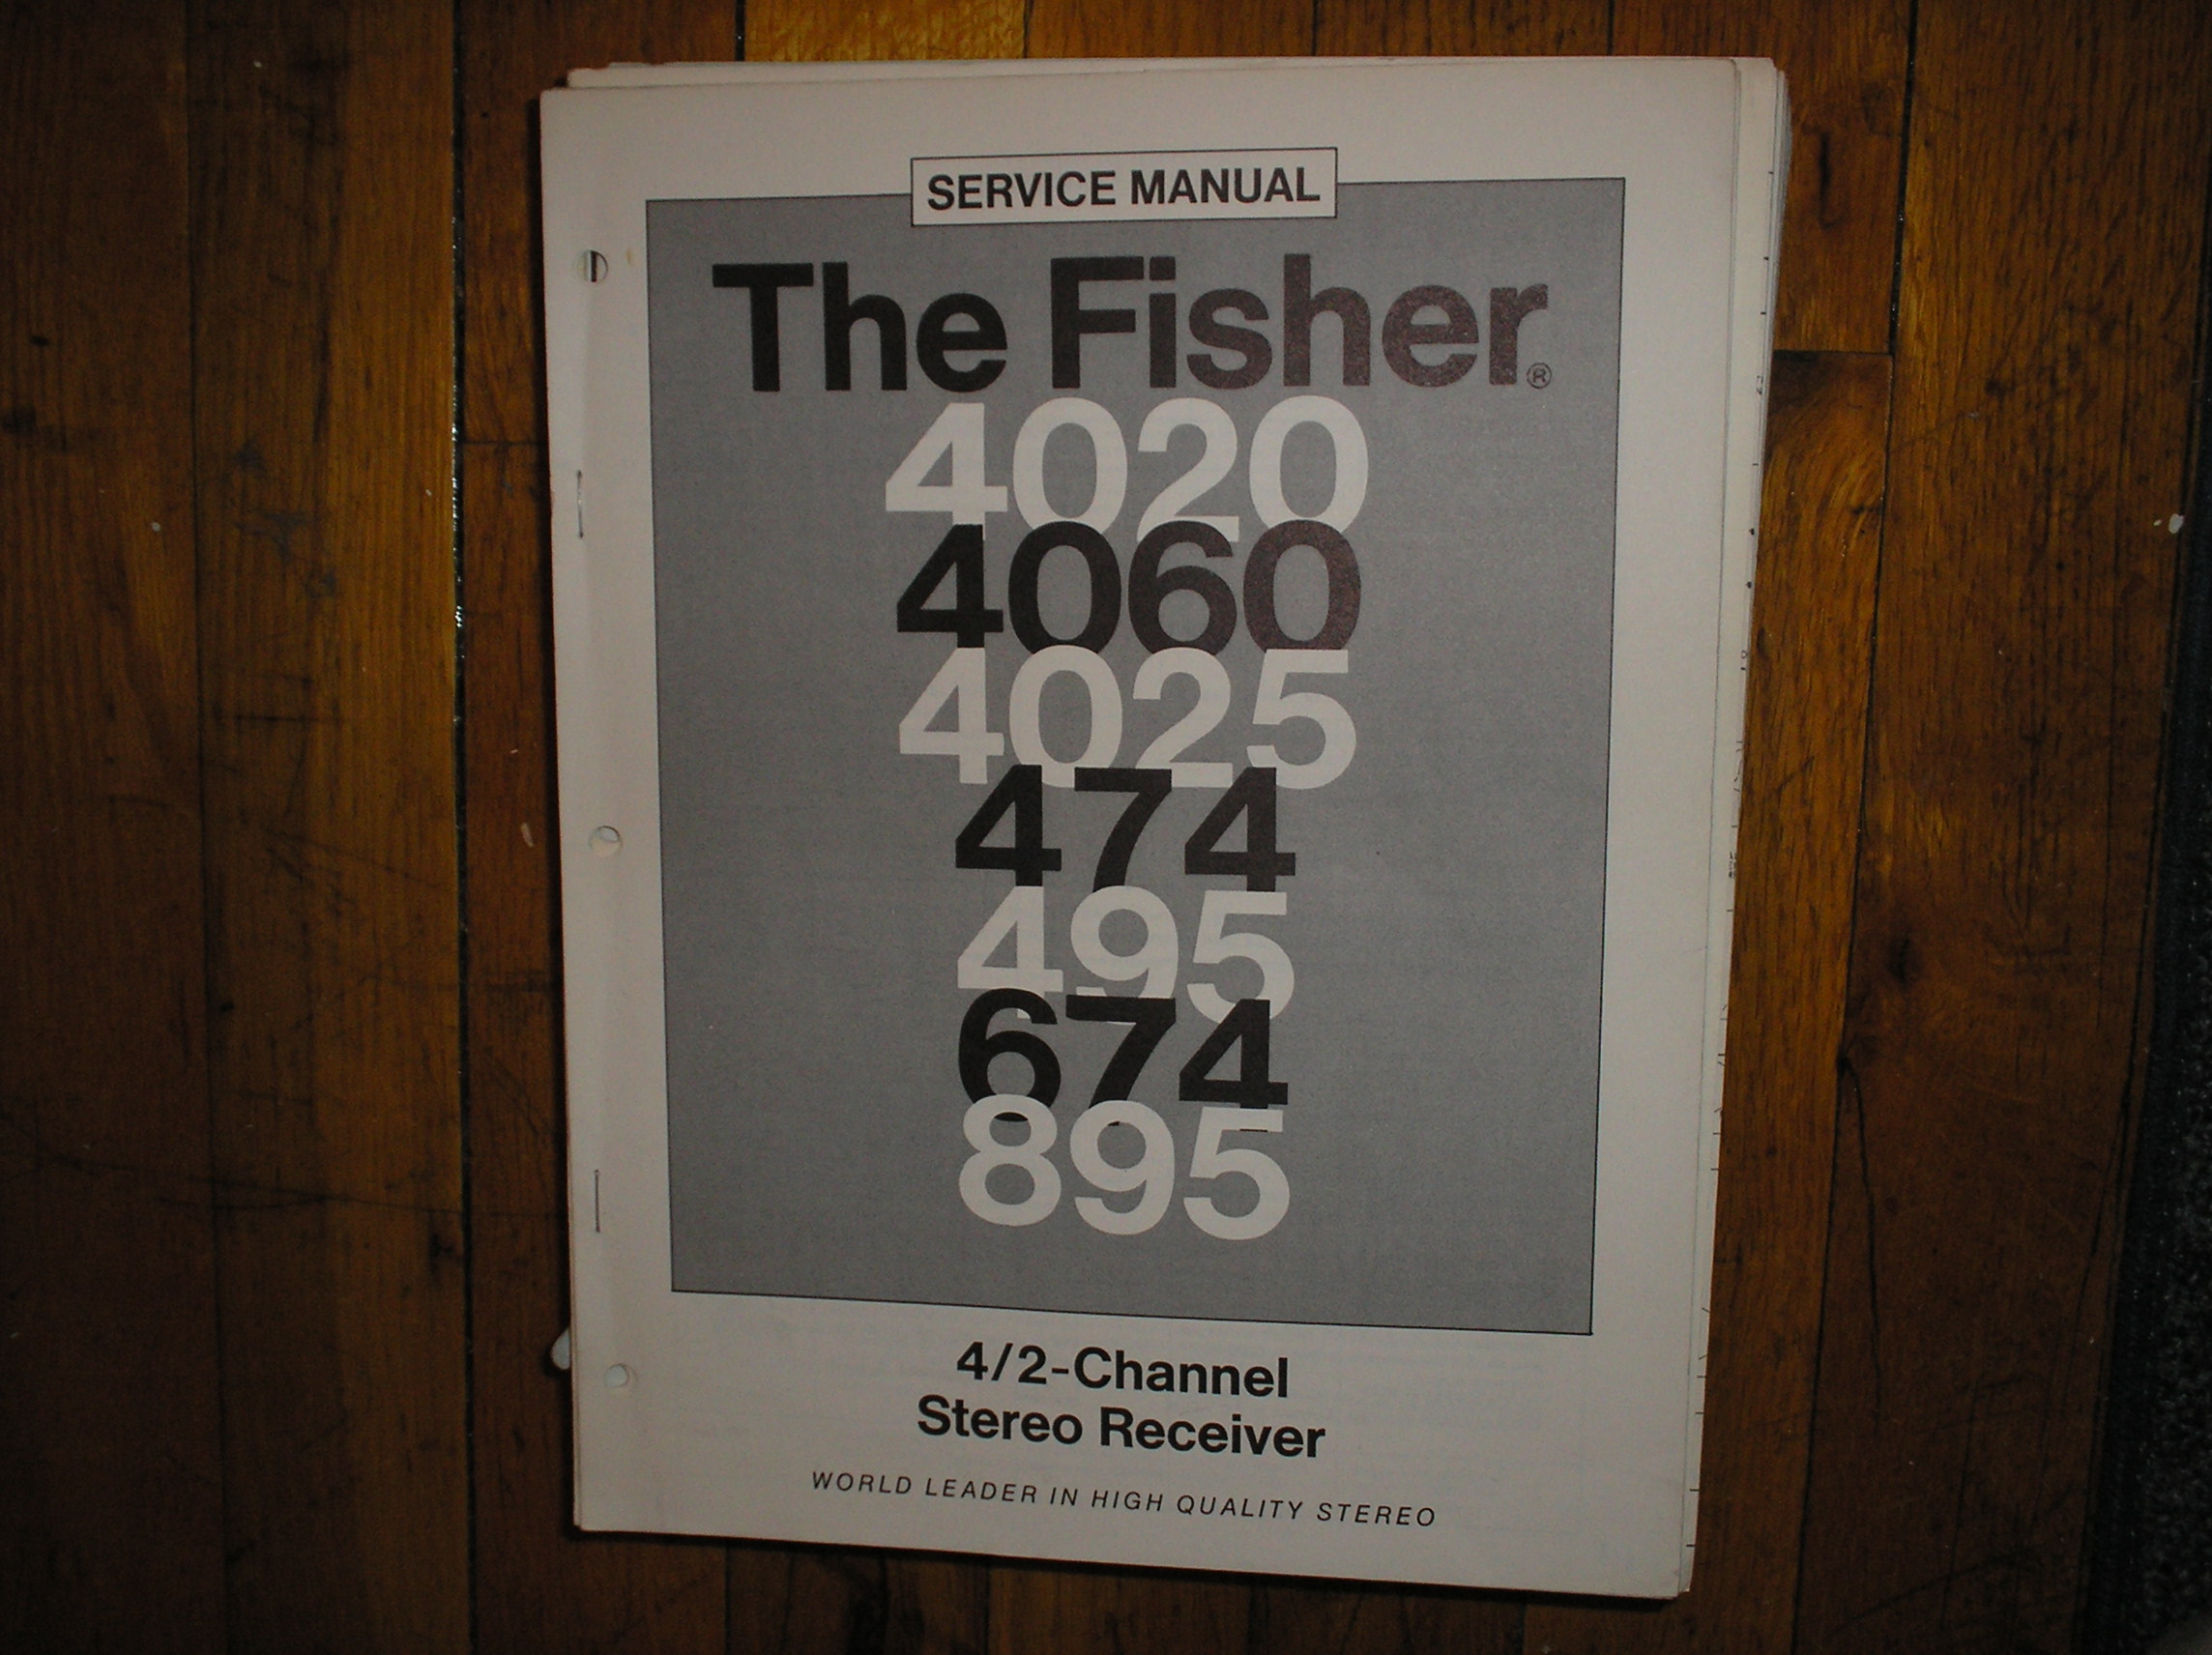 474 495 674 895 4020 4025 4060 Receiver Service Manual  Fisher